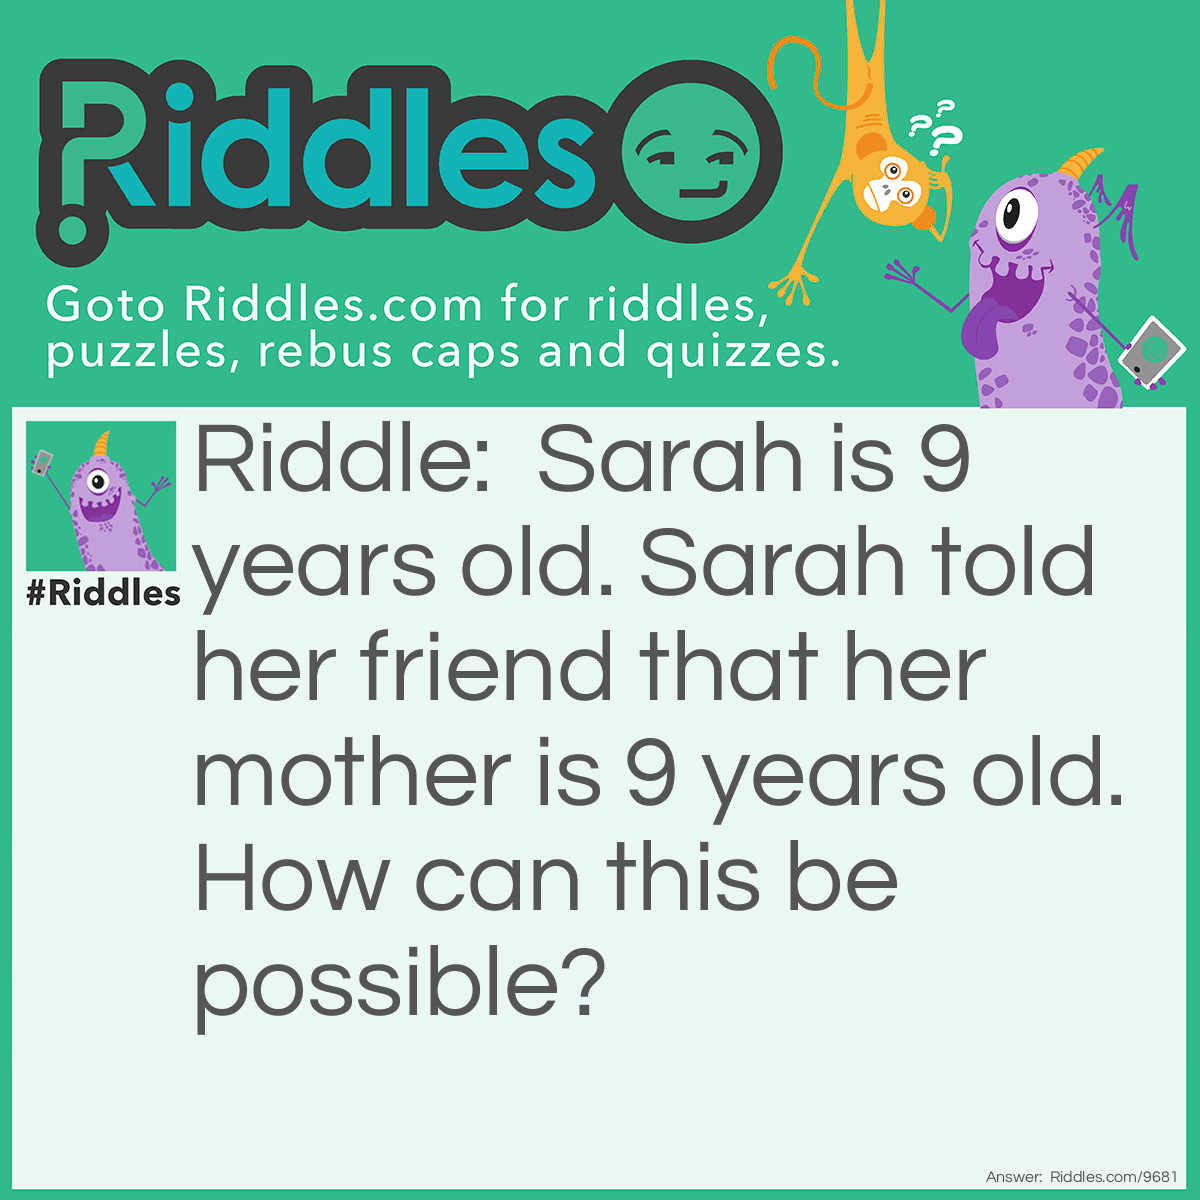 Riddle: Sarah is 9 years old. Sarah told her friend that her mother is 9 years old. How can this be possible? Answer: Her mom was 9 years old because she was a "mother" for 9 years Sarah has a 9 year old "Mother"